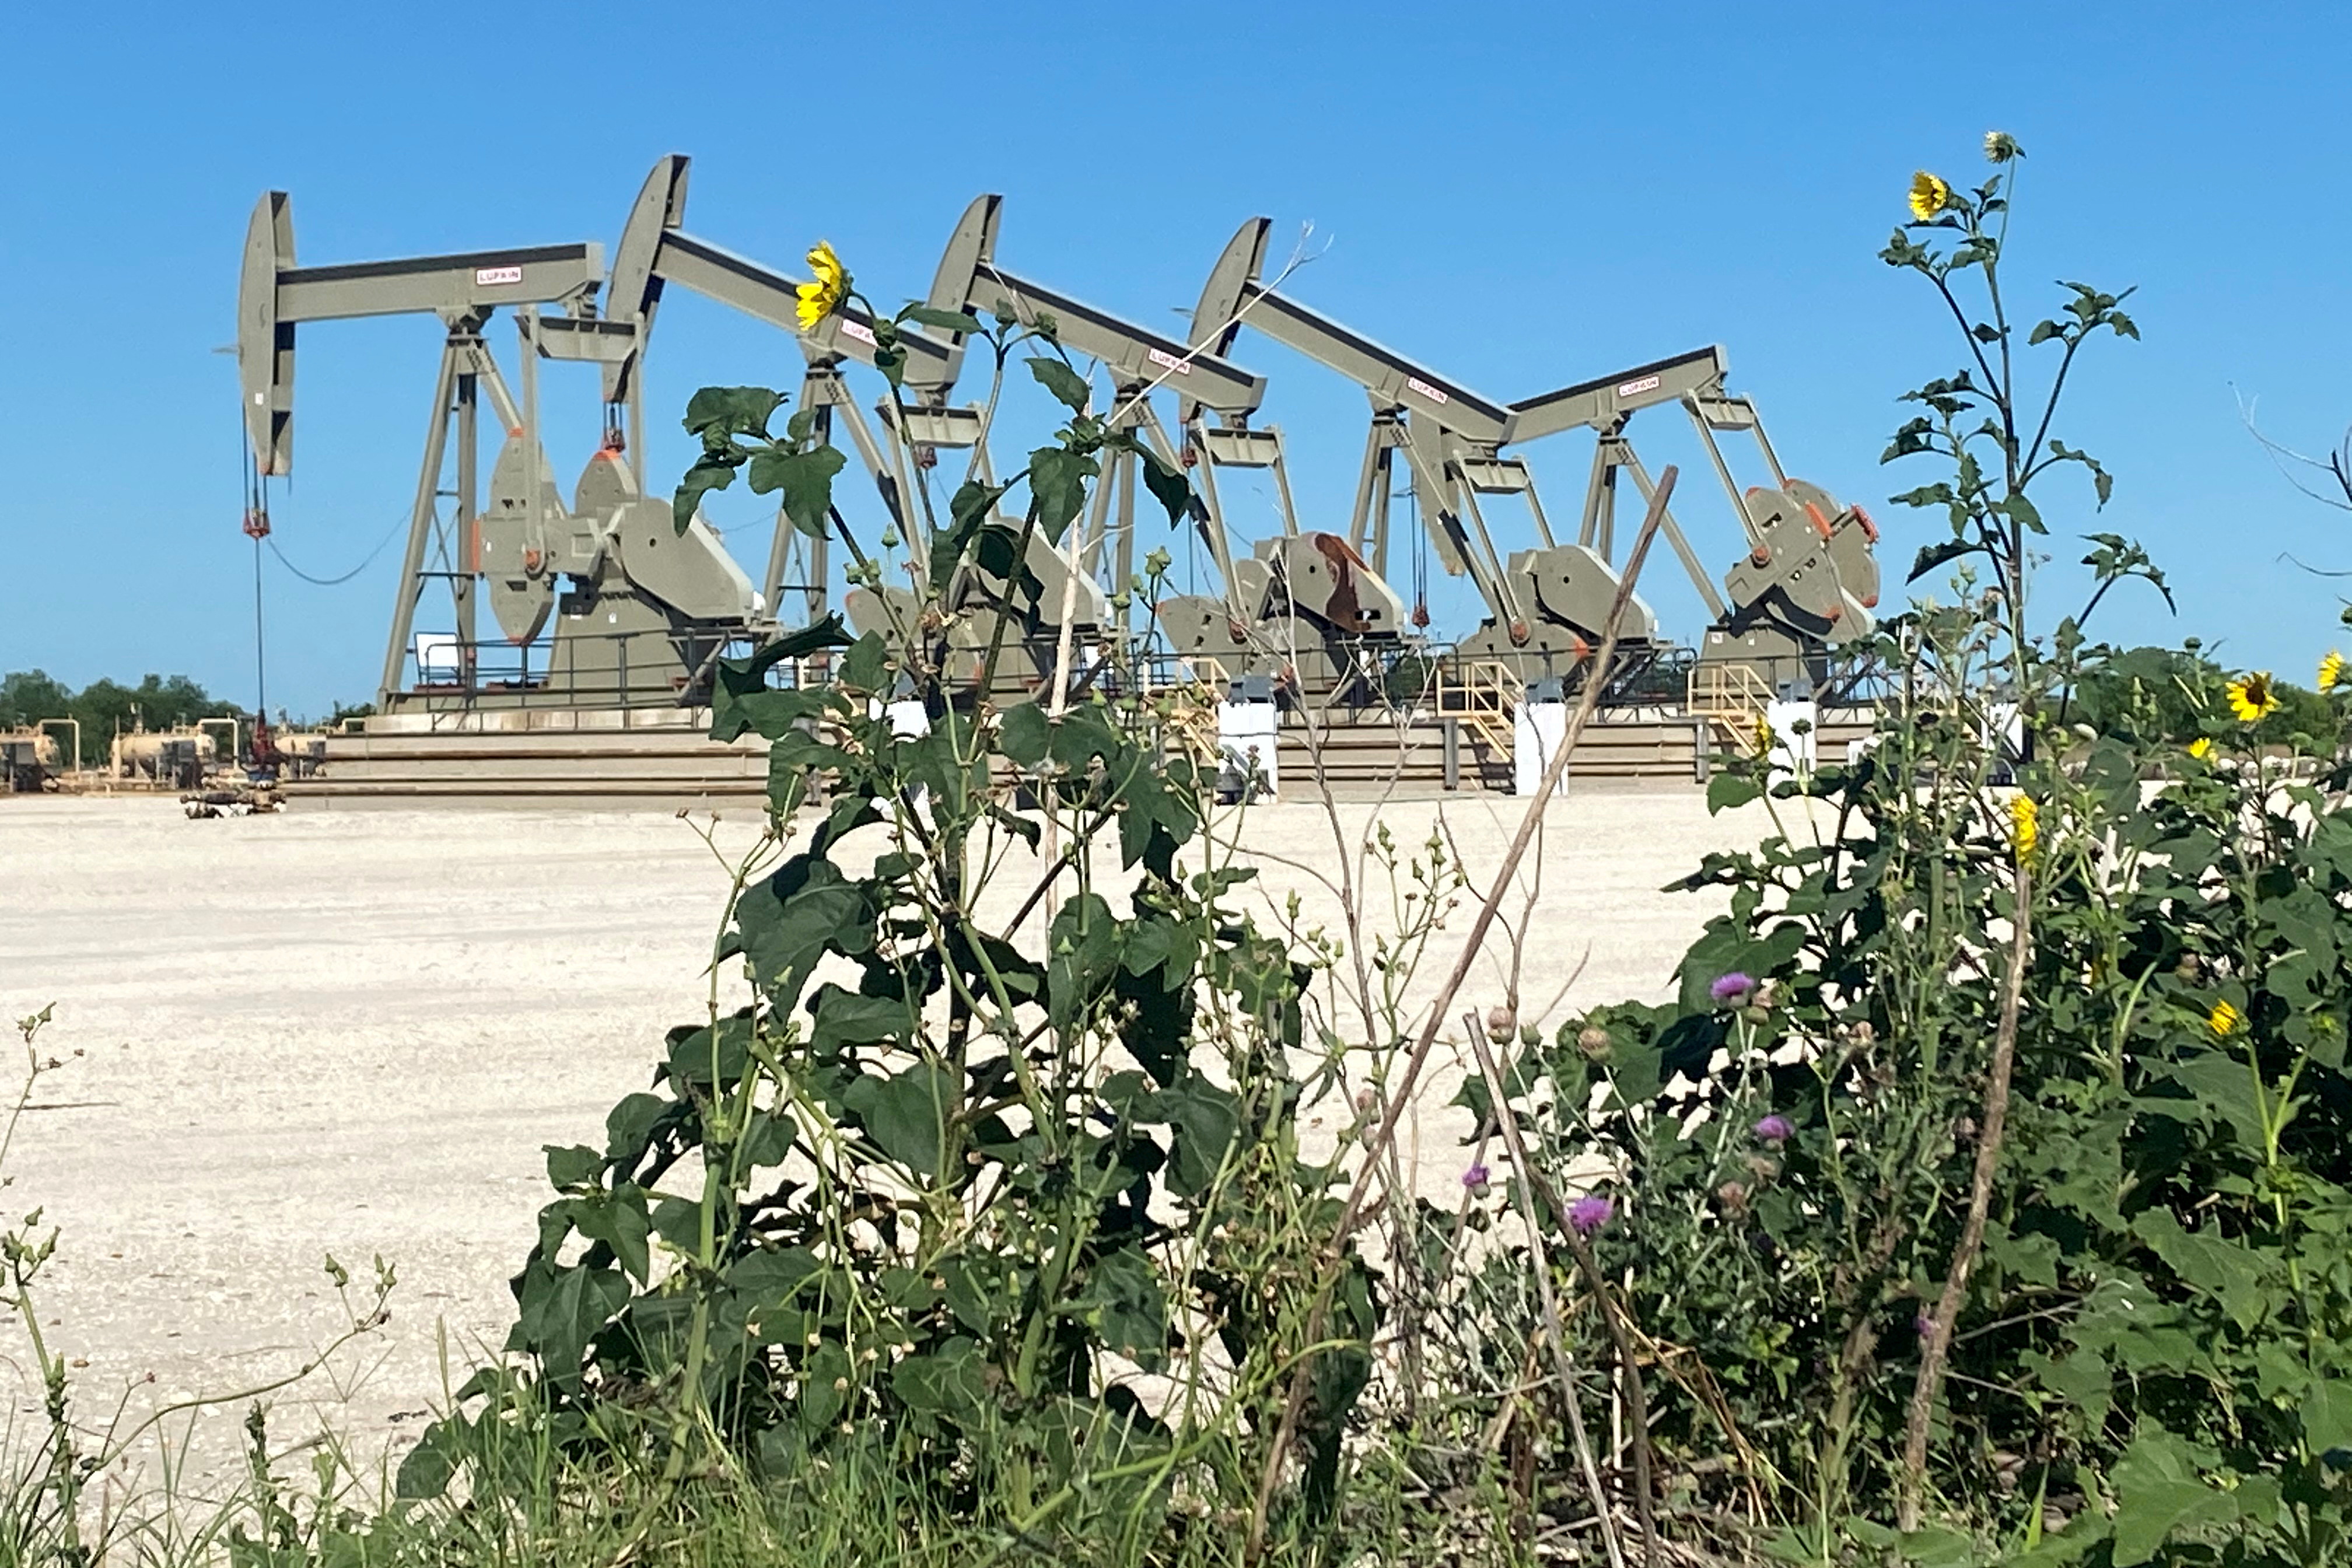 An oil well site in south Texas